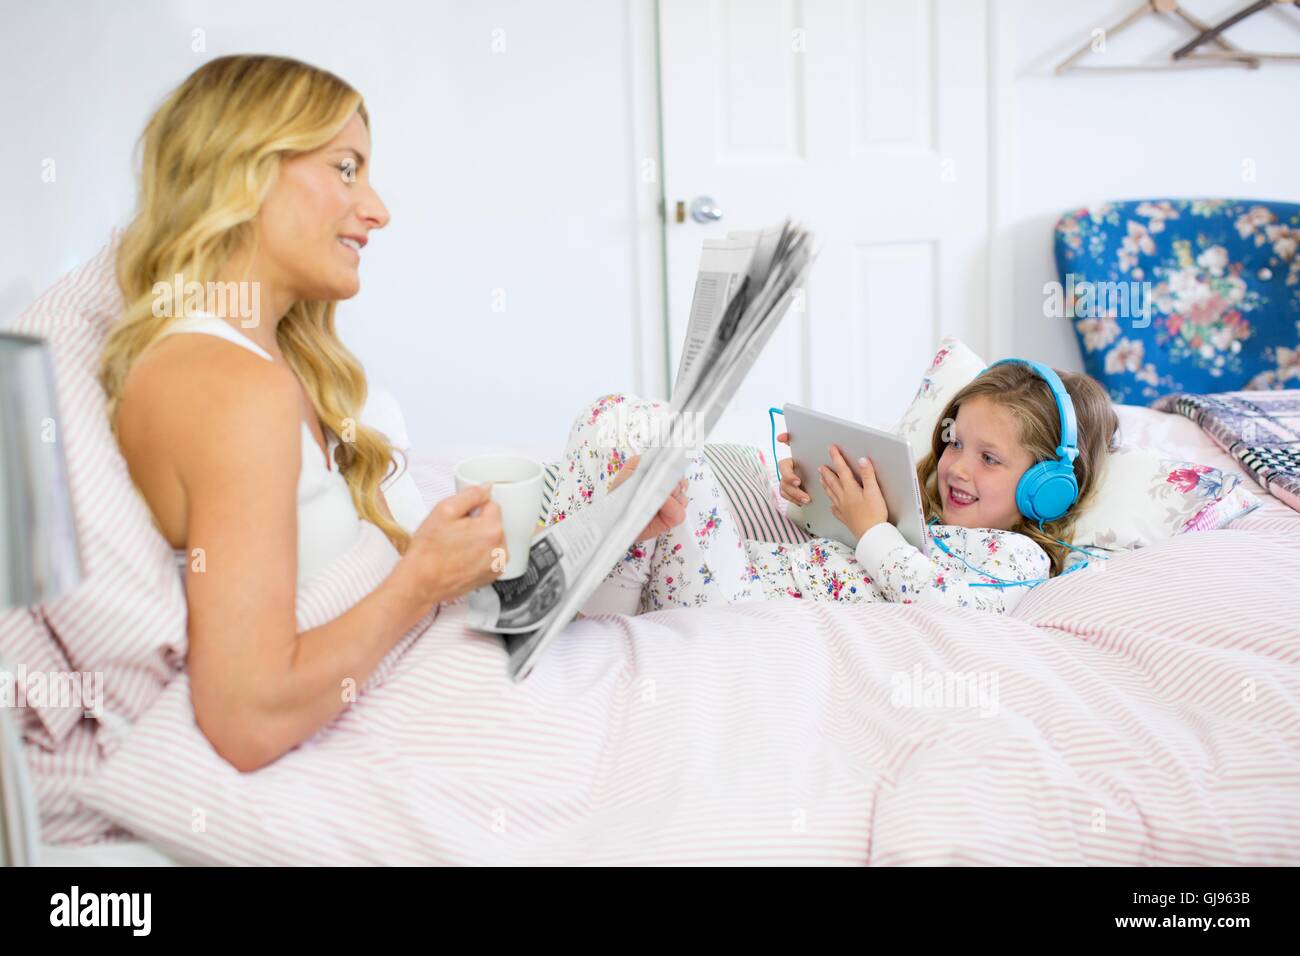 PROPERTY RELEASED. MODEL RELEASED. Mother and daughter in bed with newspaper and digital tablet. Stock Photo